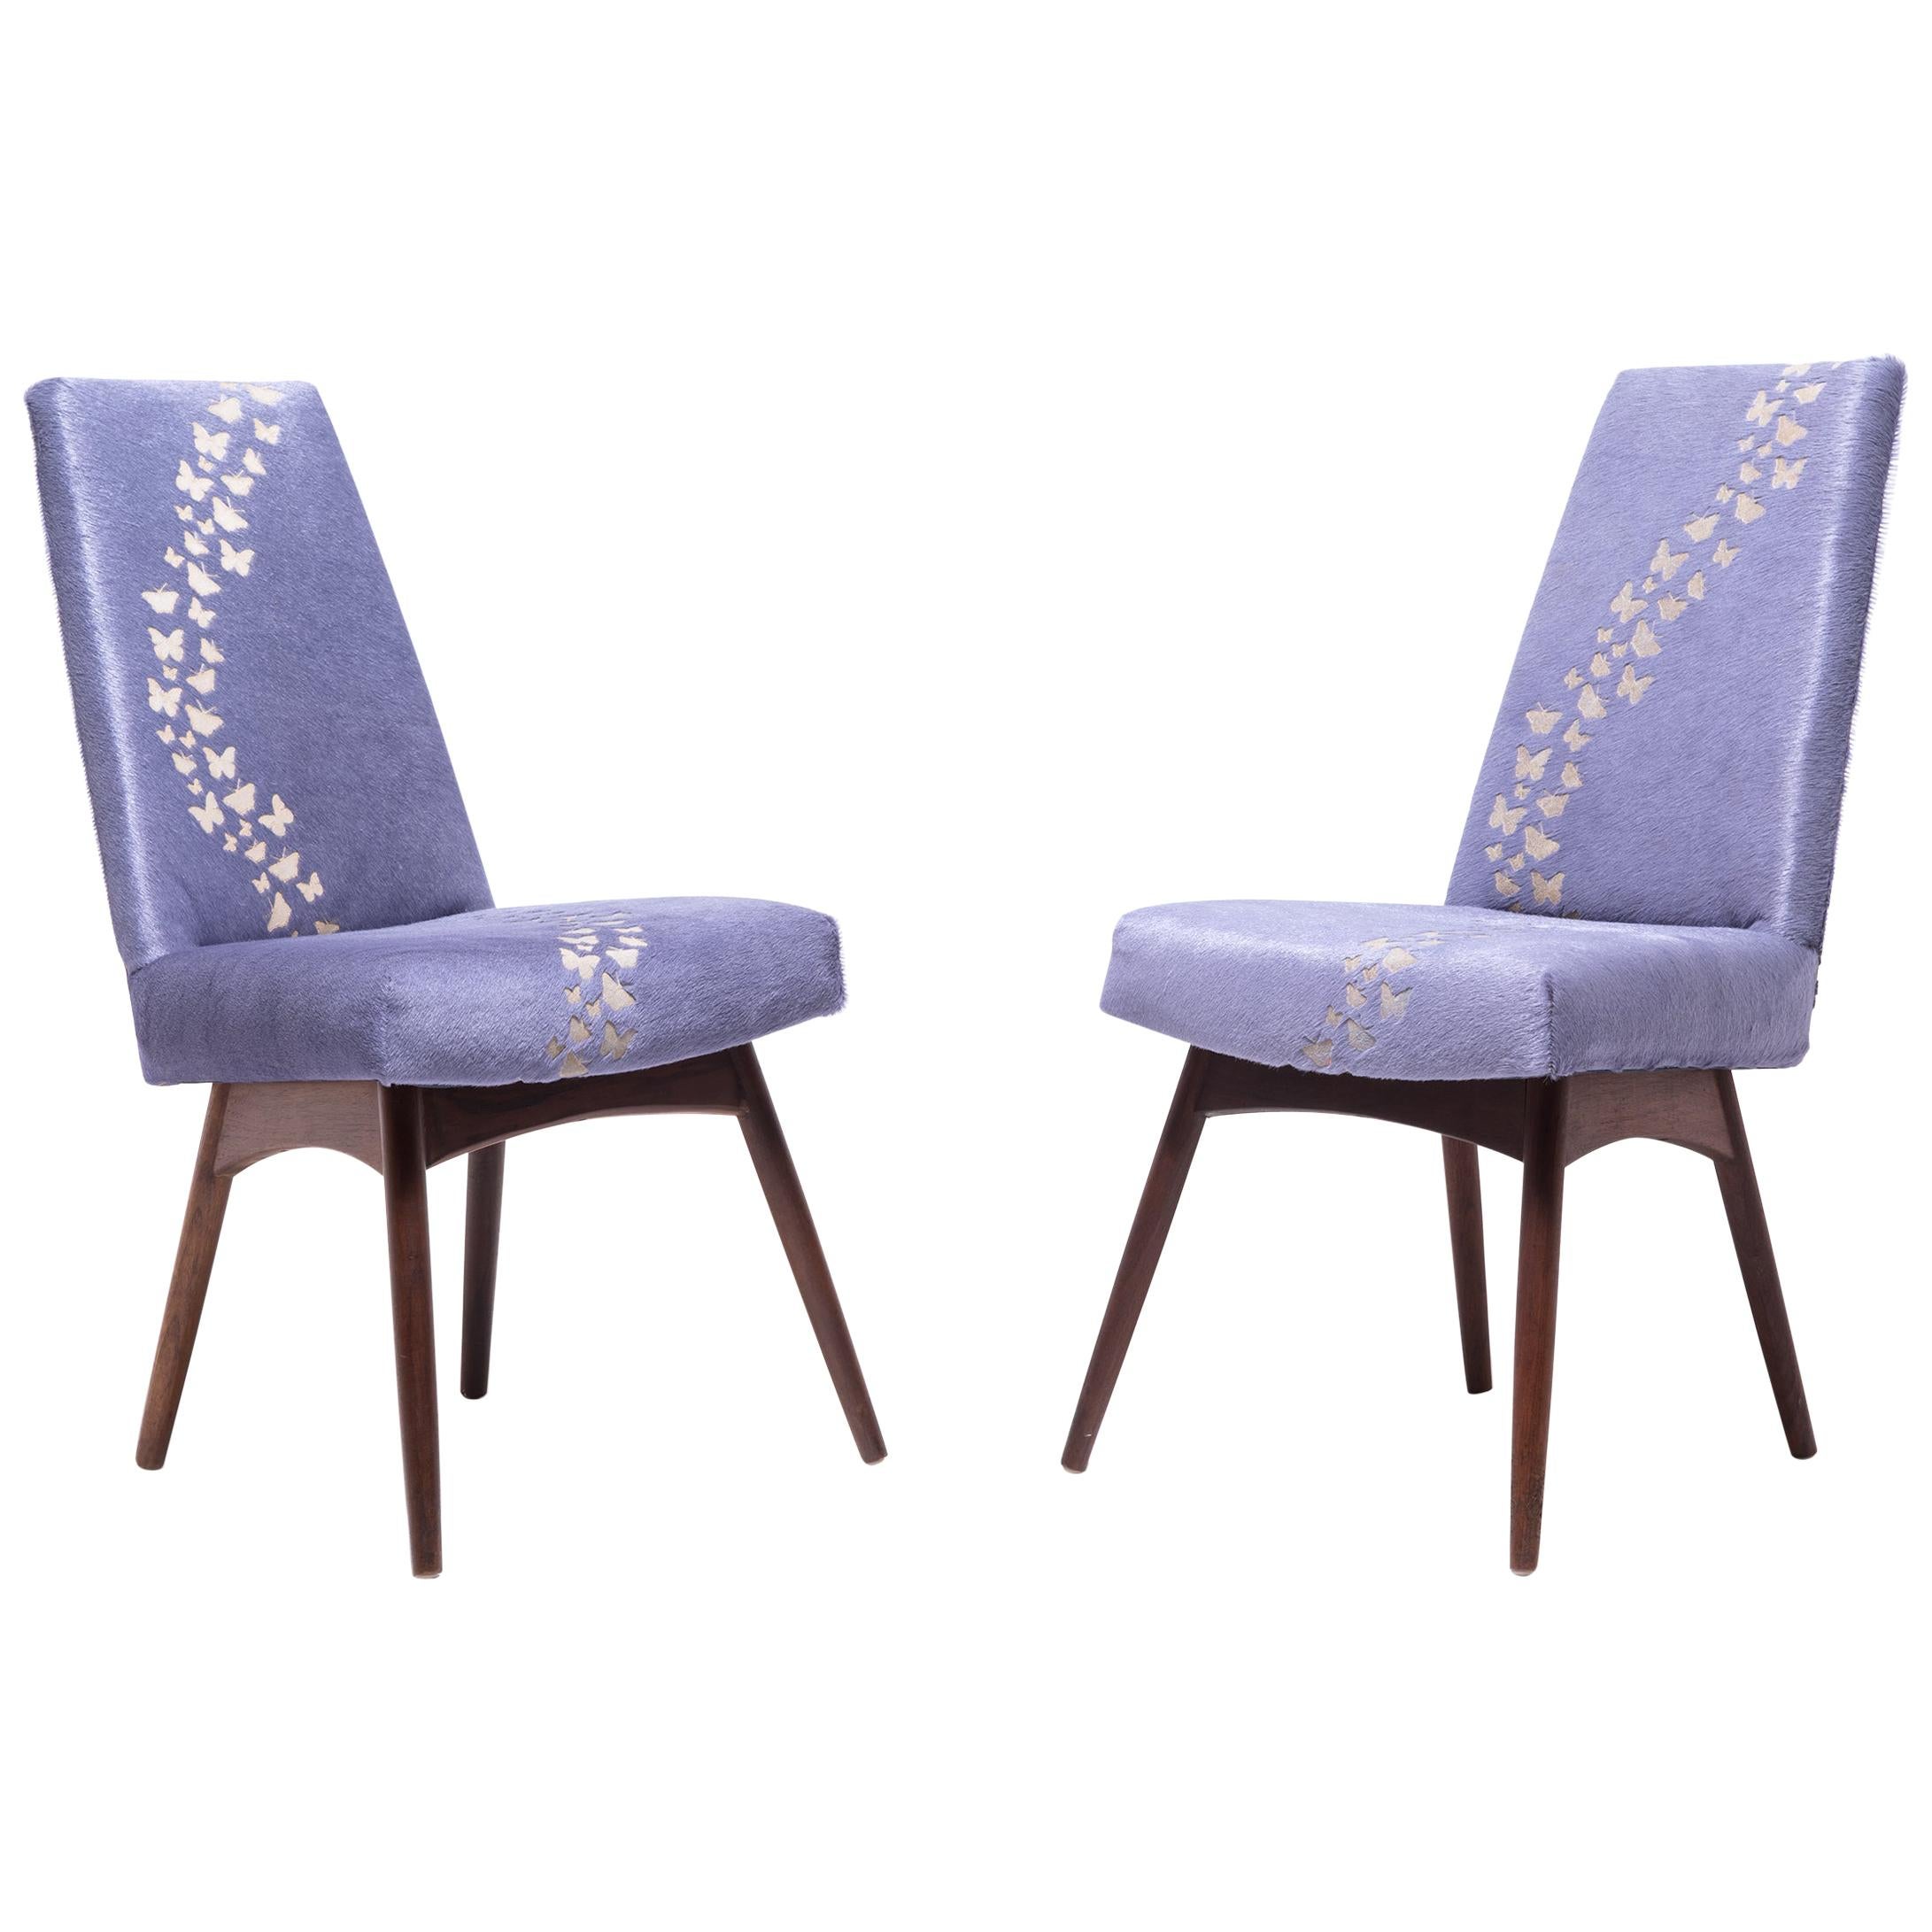 Pair of Vintage Pearsall Chairs with Laser-Cut Butterflies on Hide